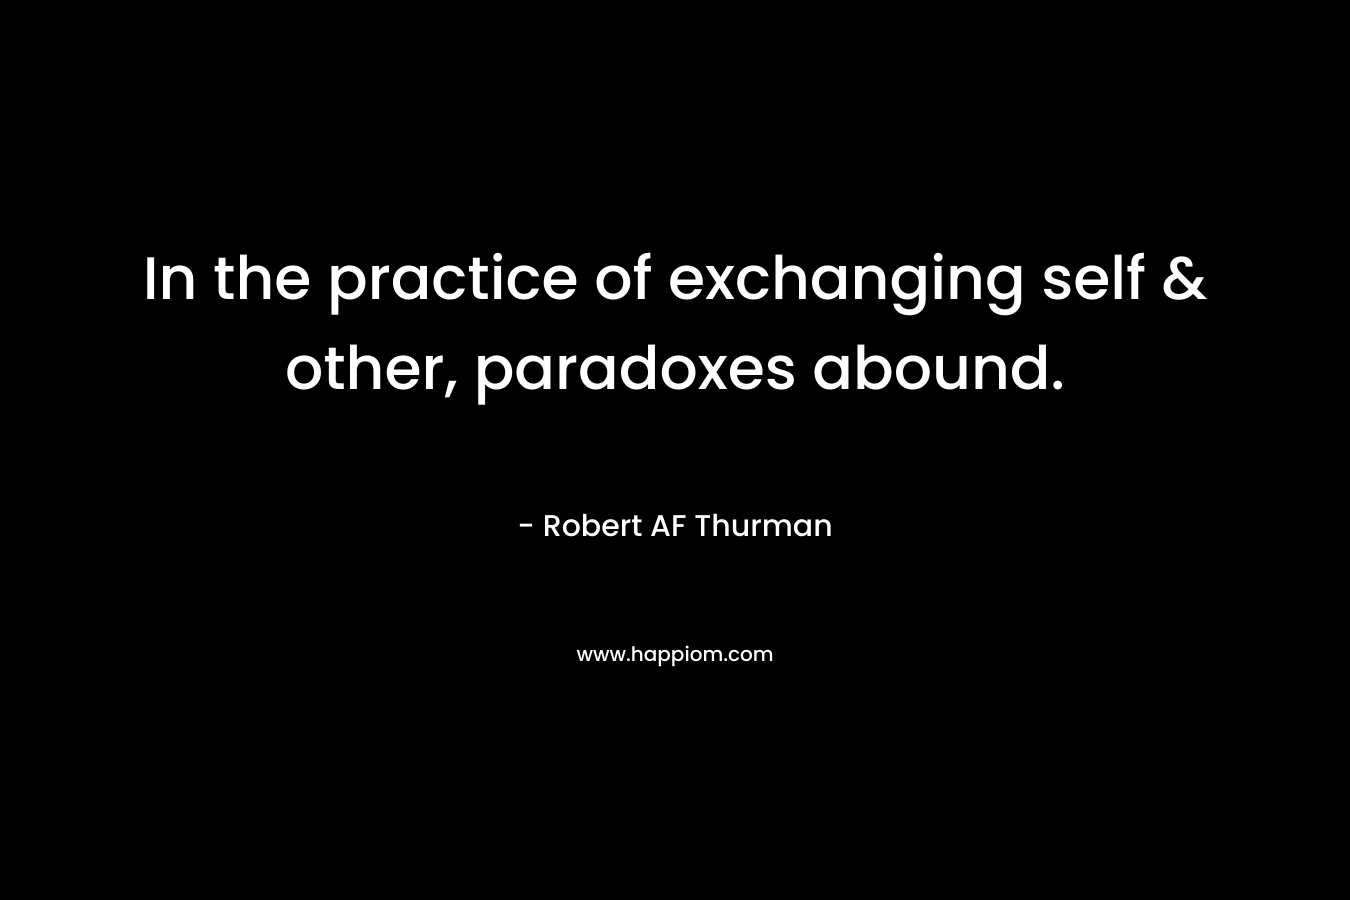 In the practice of exchanging self & other, paradoxes abound. – Robert AF Thurman